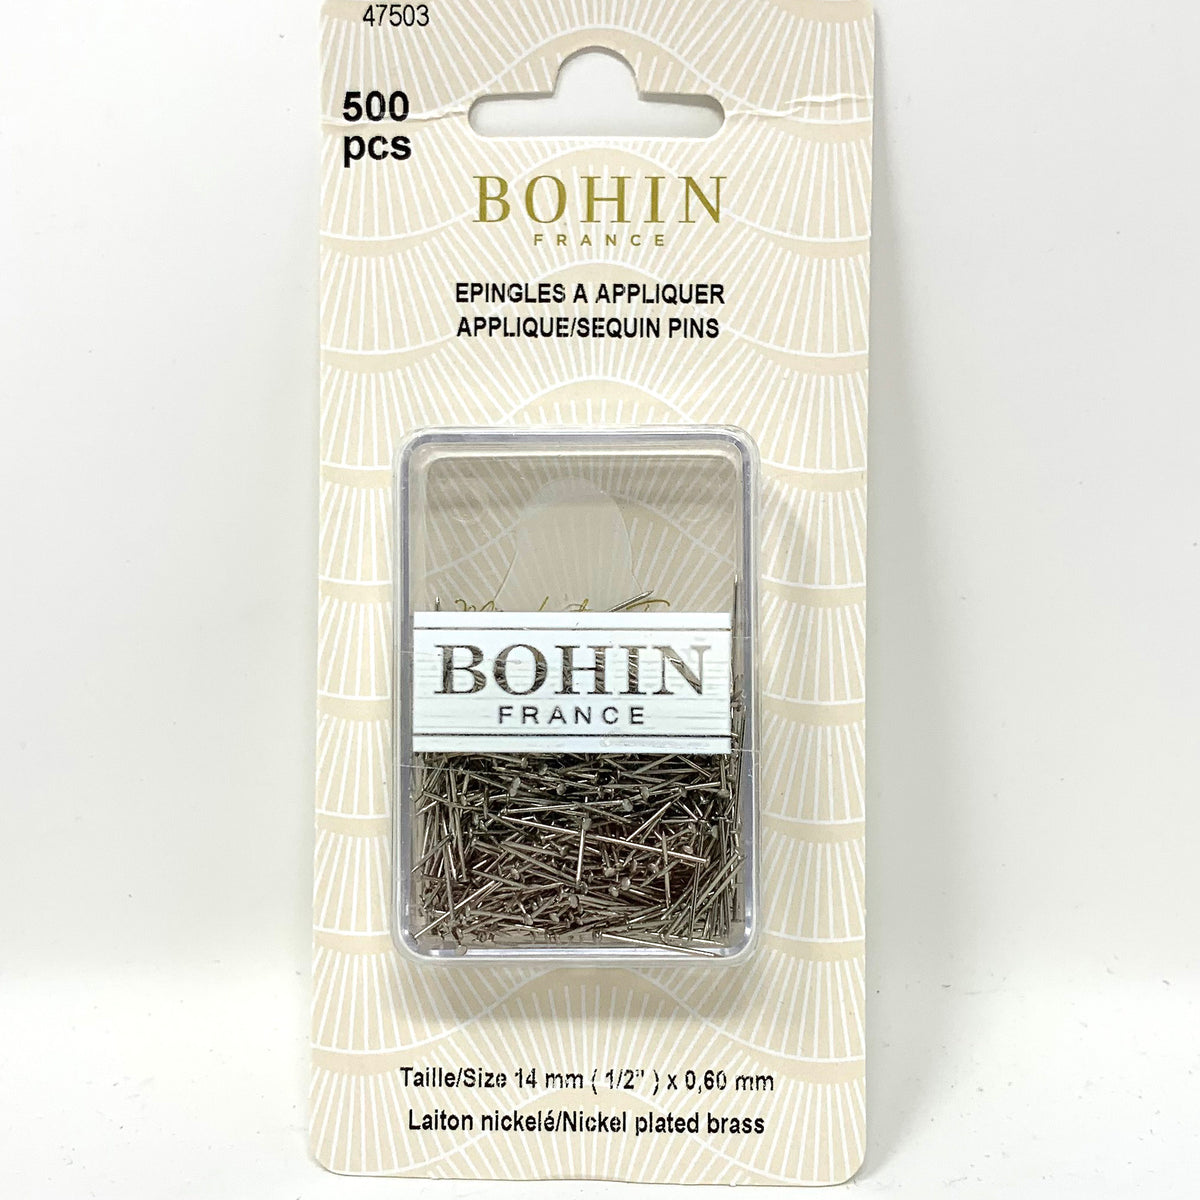  12 Packs: 800 ct. (9,600 Total) 1/2”; Brass Applique/Sequin Pins  by Loops & Threads®